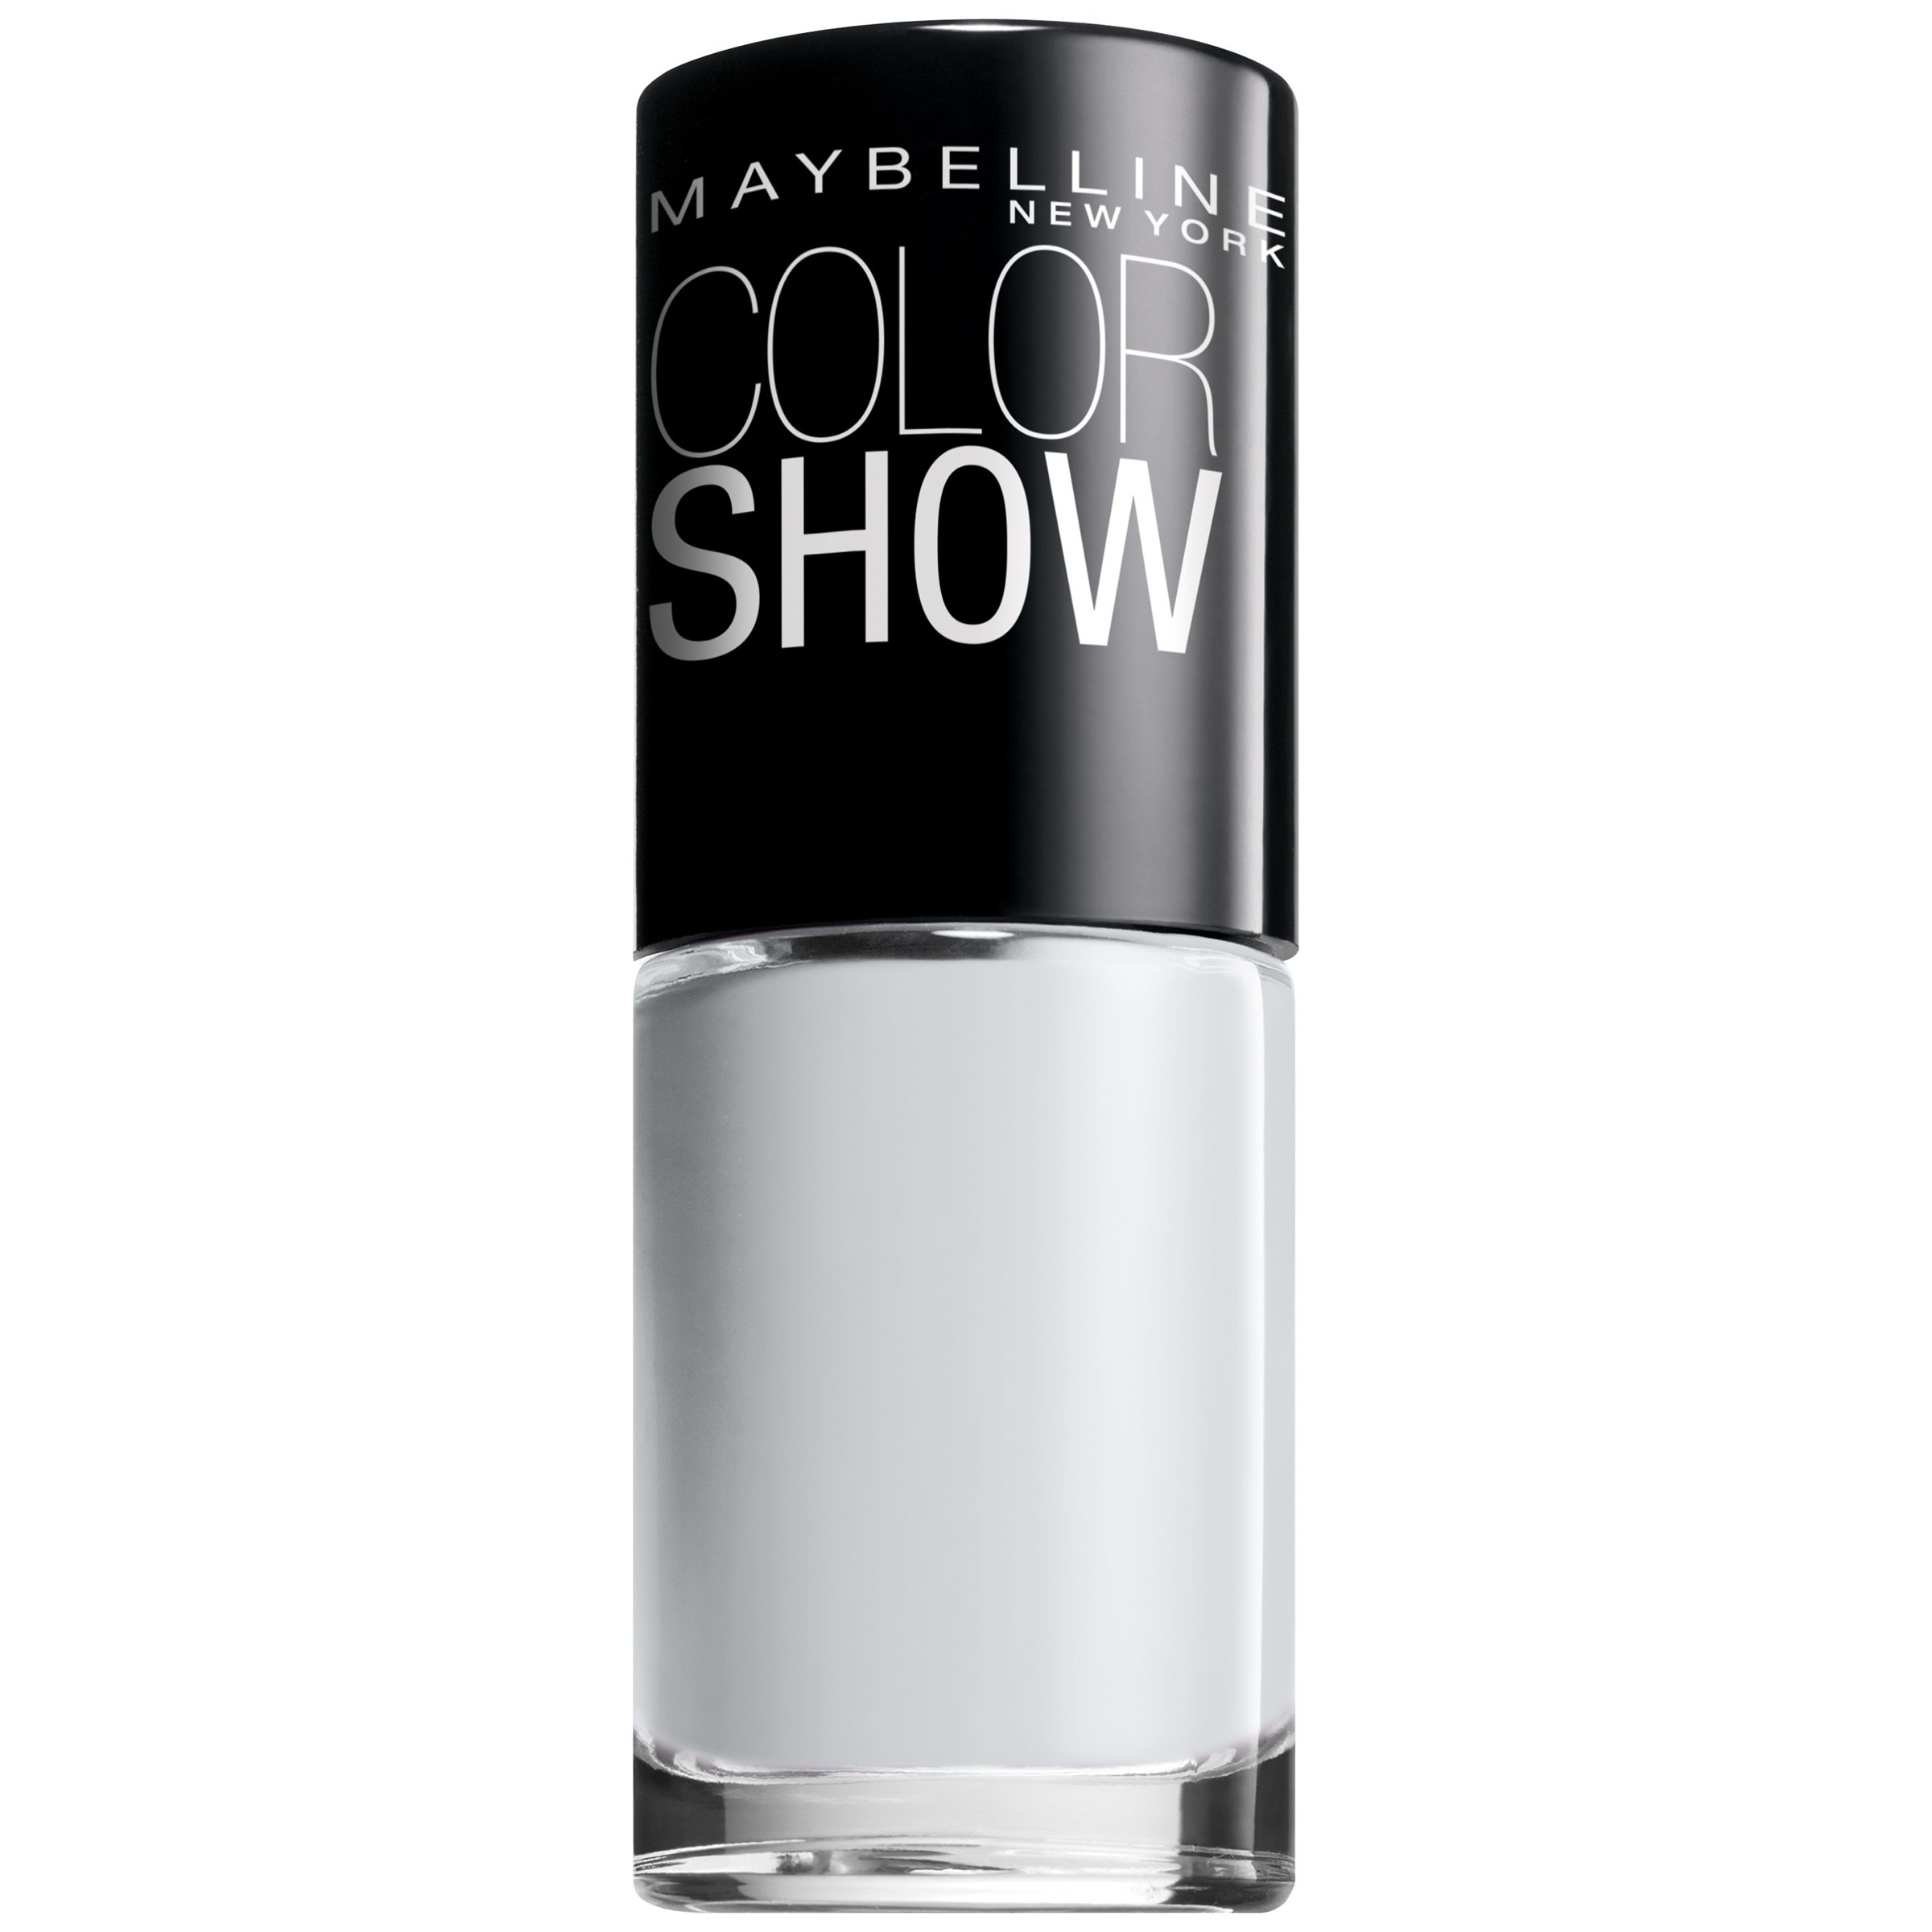 Maybelline New York Color Show Nail Lacquer, Audacious Asphalt, 0.23 Fluid Ounce - image 1 of 2